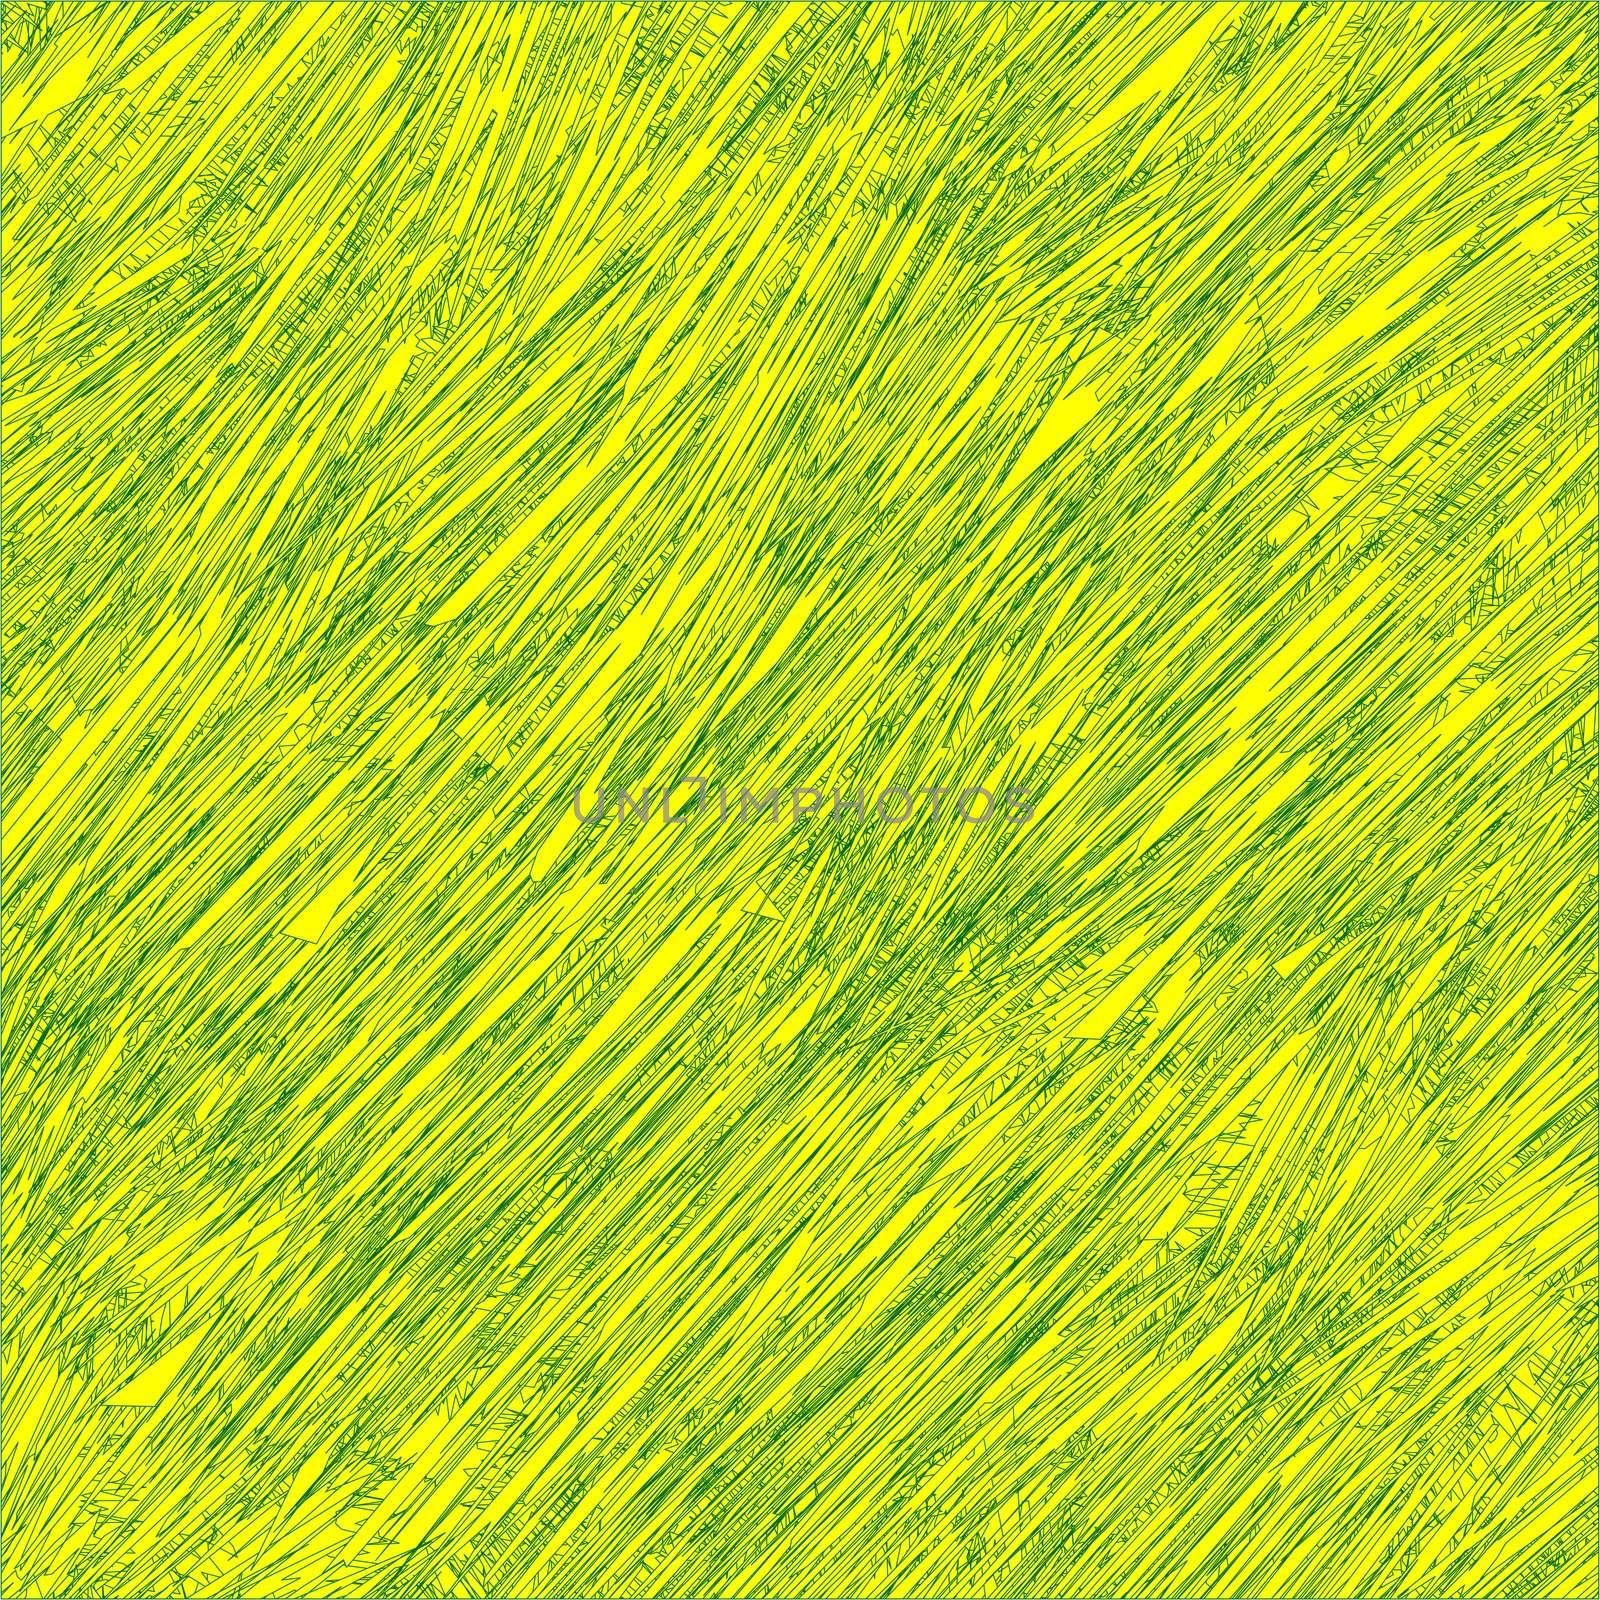 yellow and green stripes, abstract art illustration